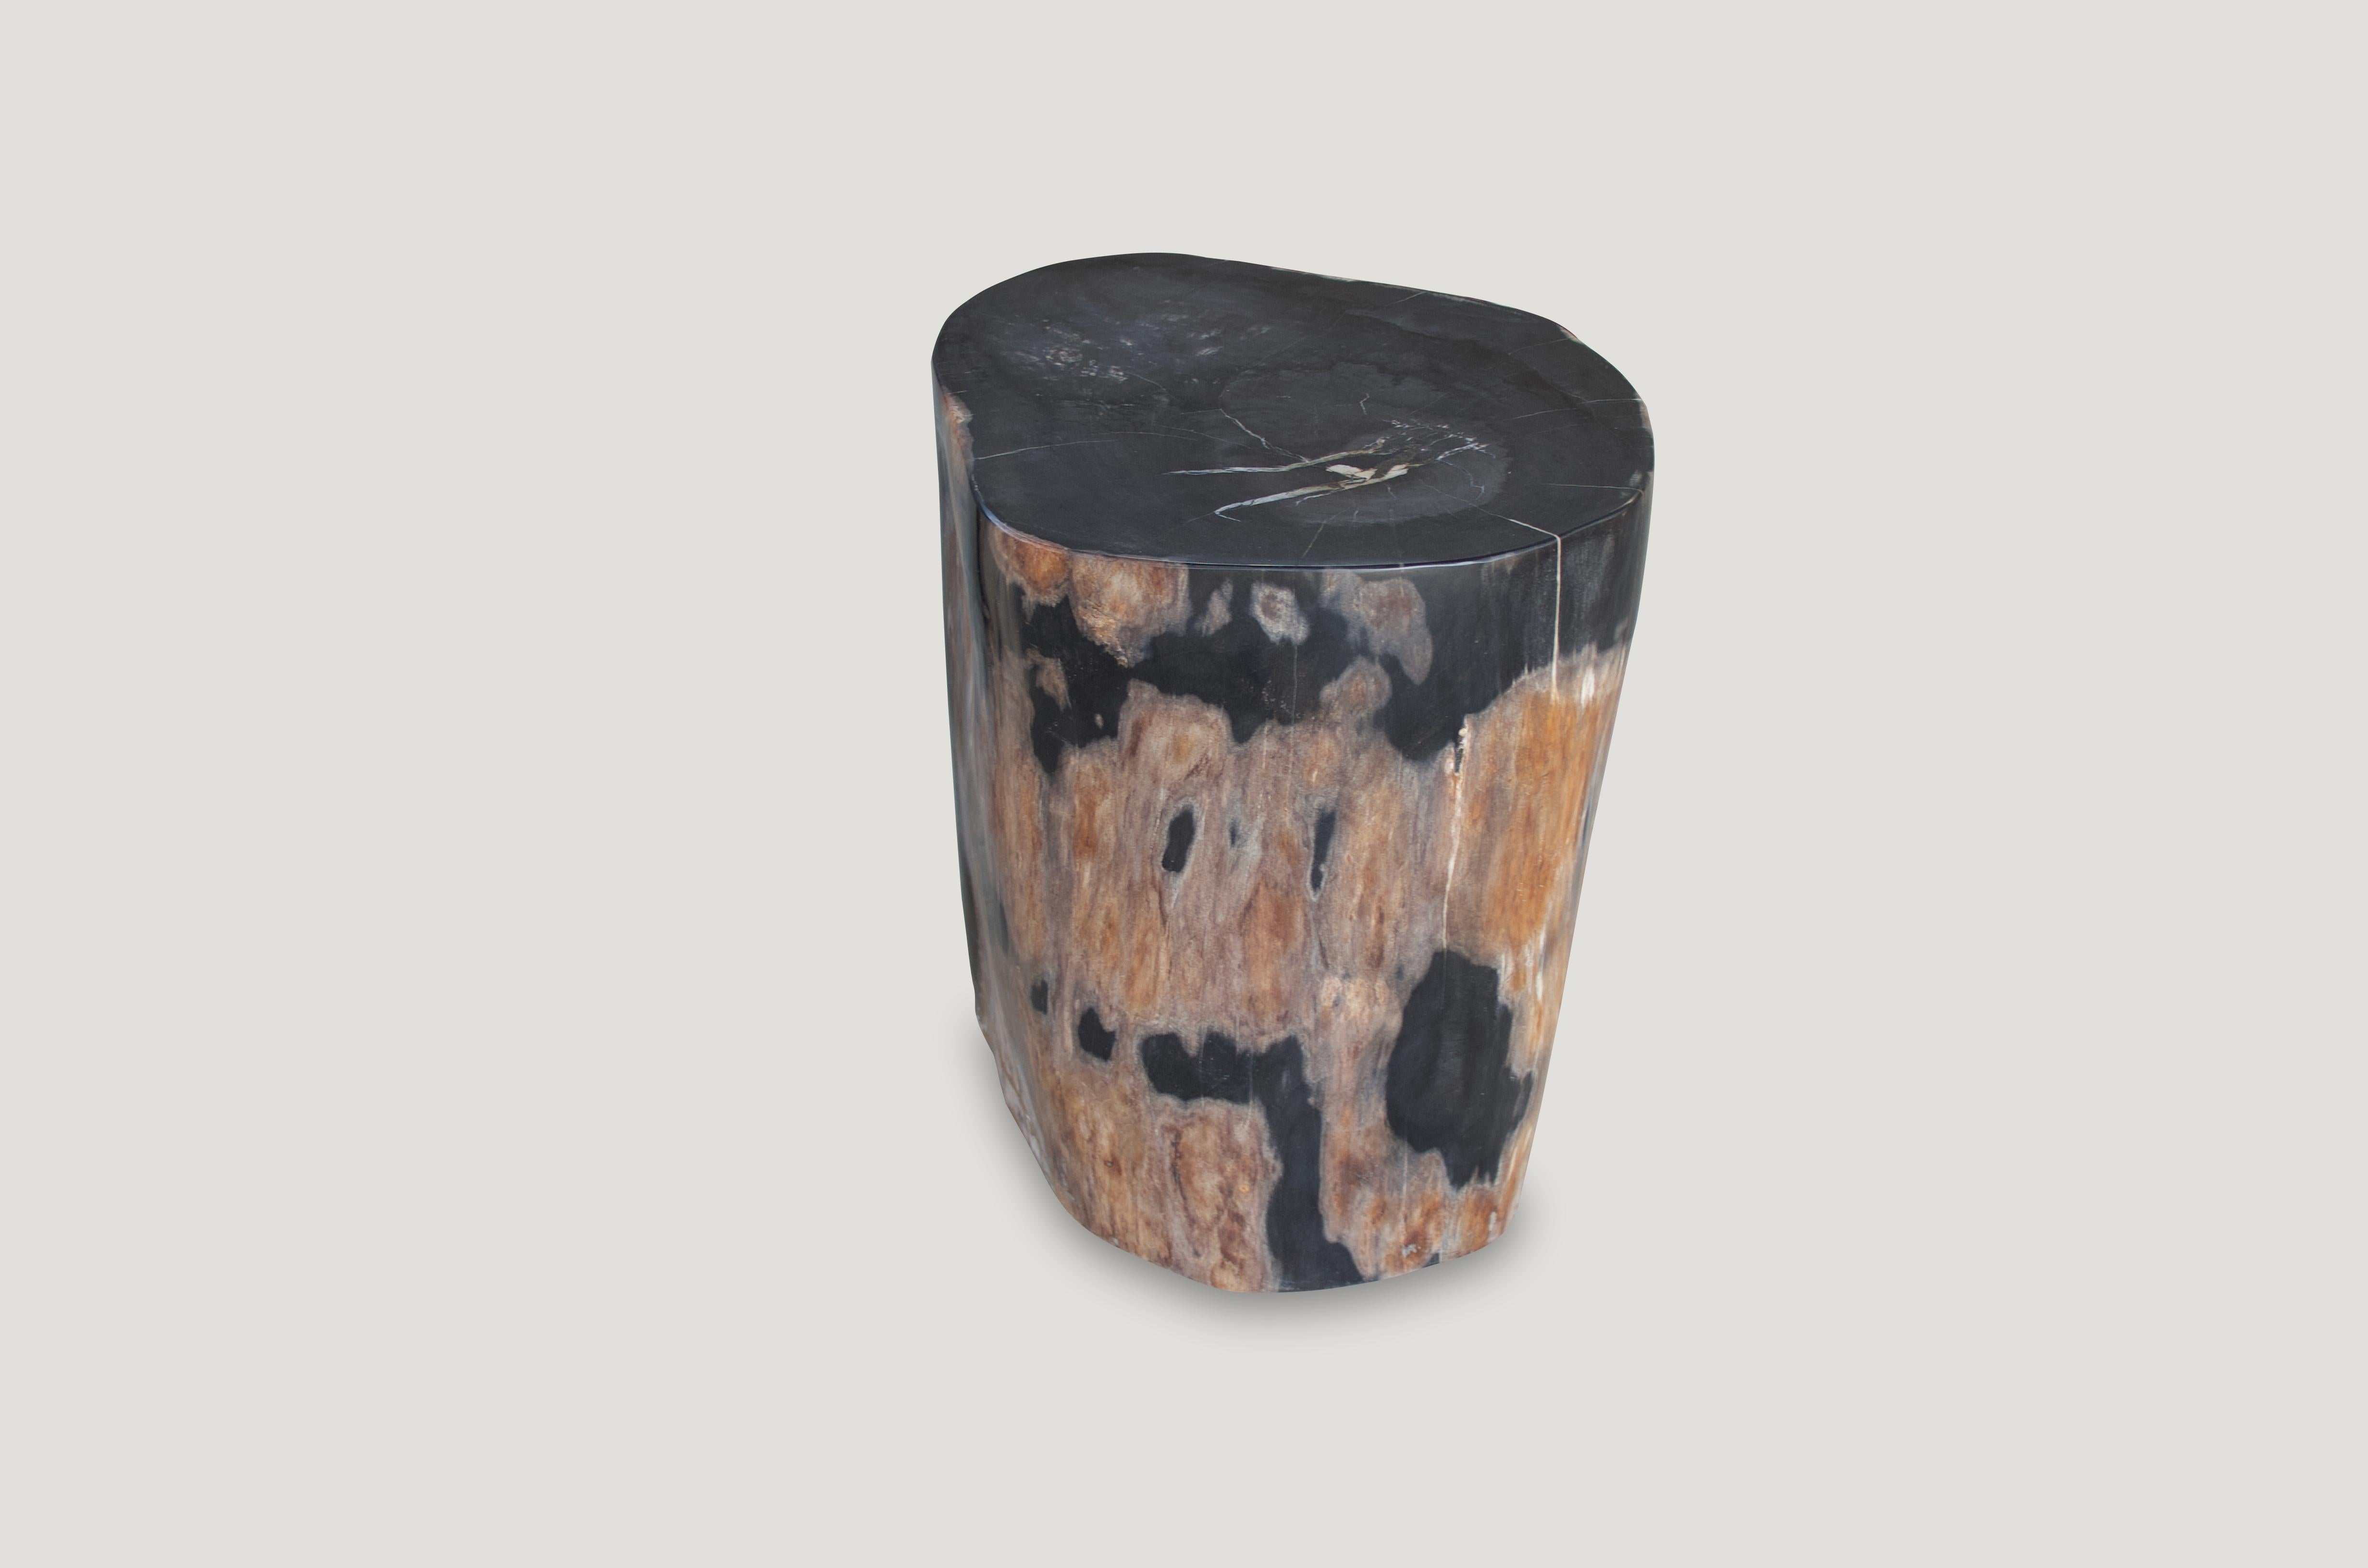 Stunning, contrasting tones on this super smooth, high quality petrified wood side table.

As with a diamond, we polish the highest quality fossilized petrified wood, using our latest ground breaking technology, to reveal its natural beauty and